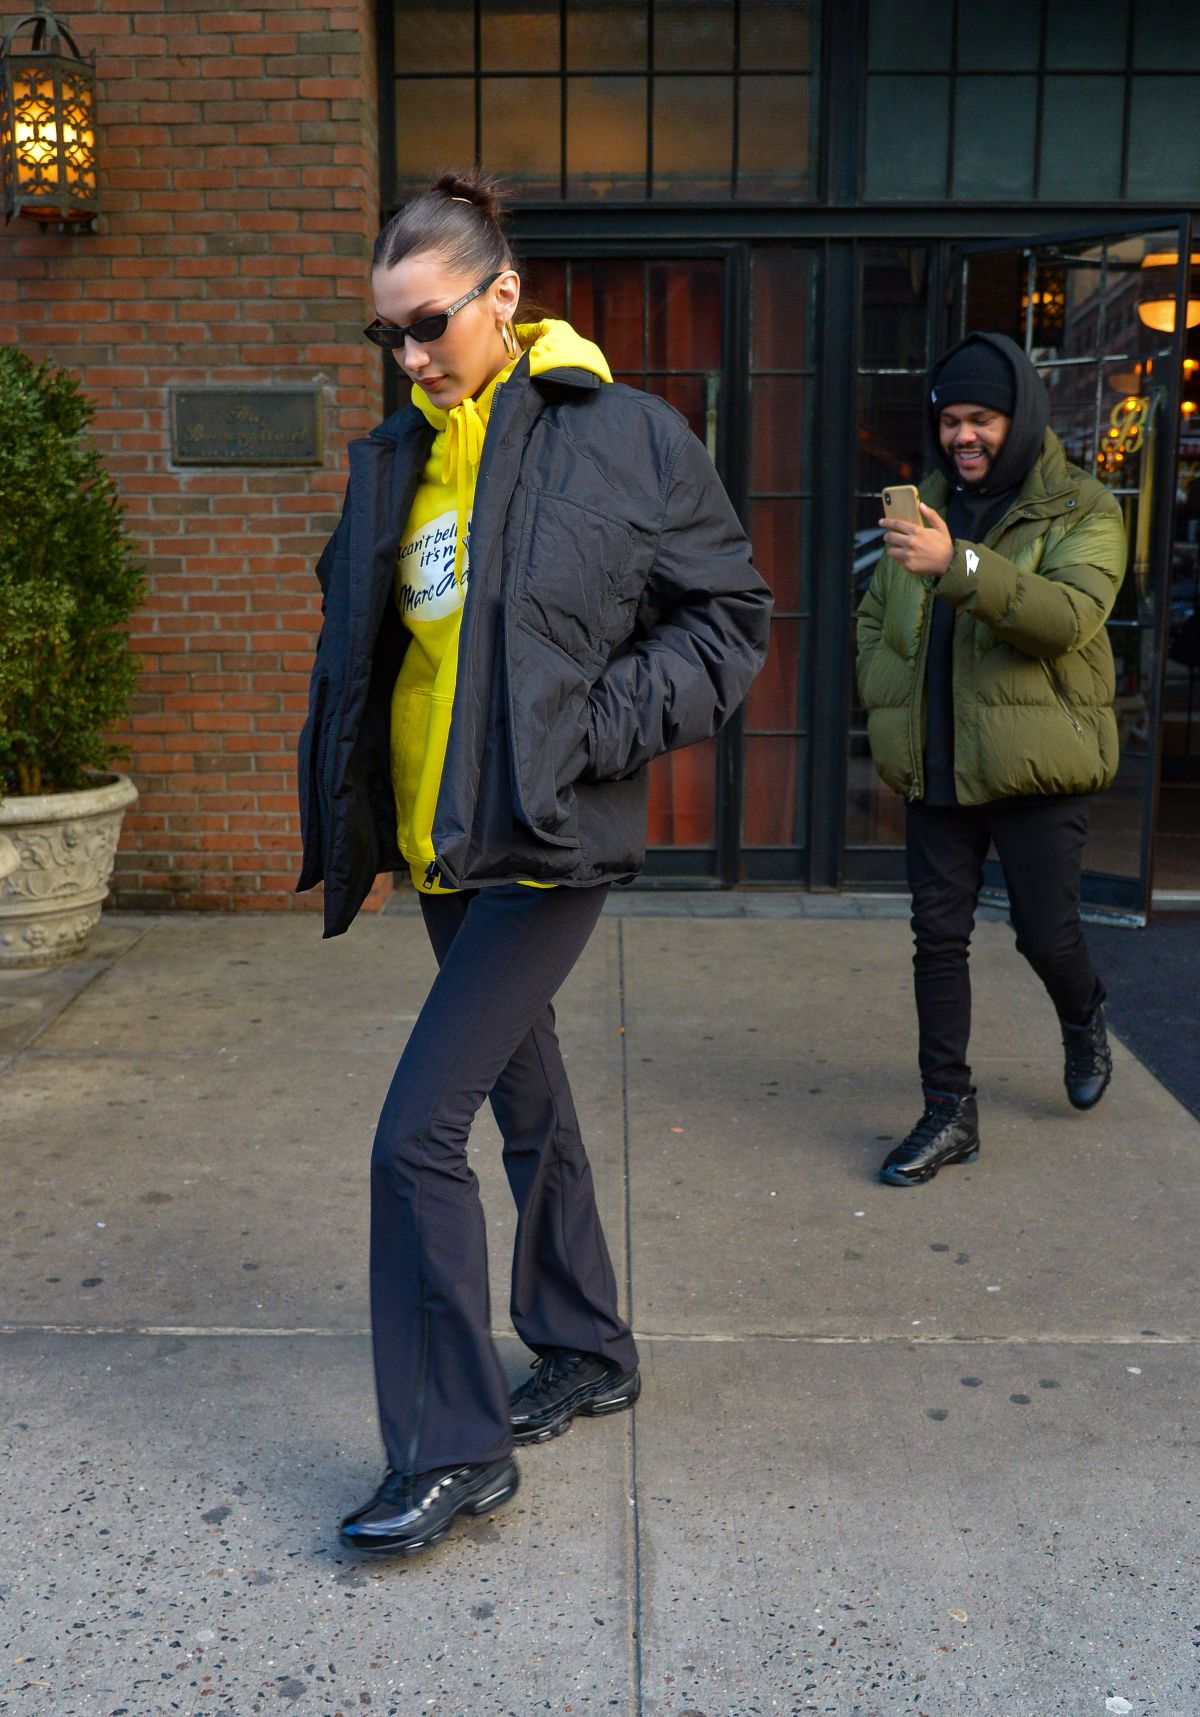 BELLA HADID and The Weeknd Out in New York 01/26/2019 – HawtCelebs